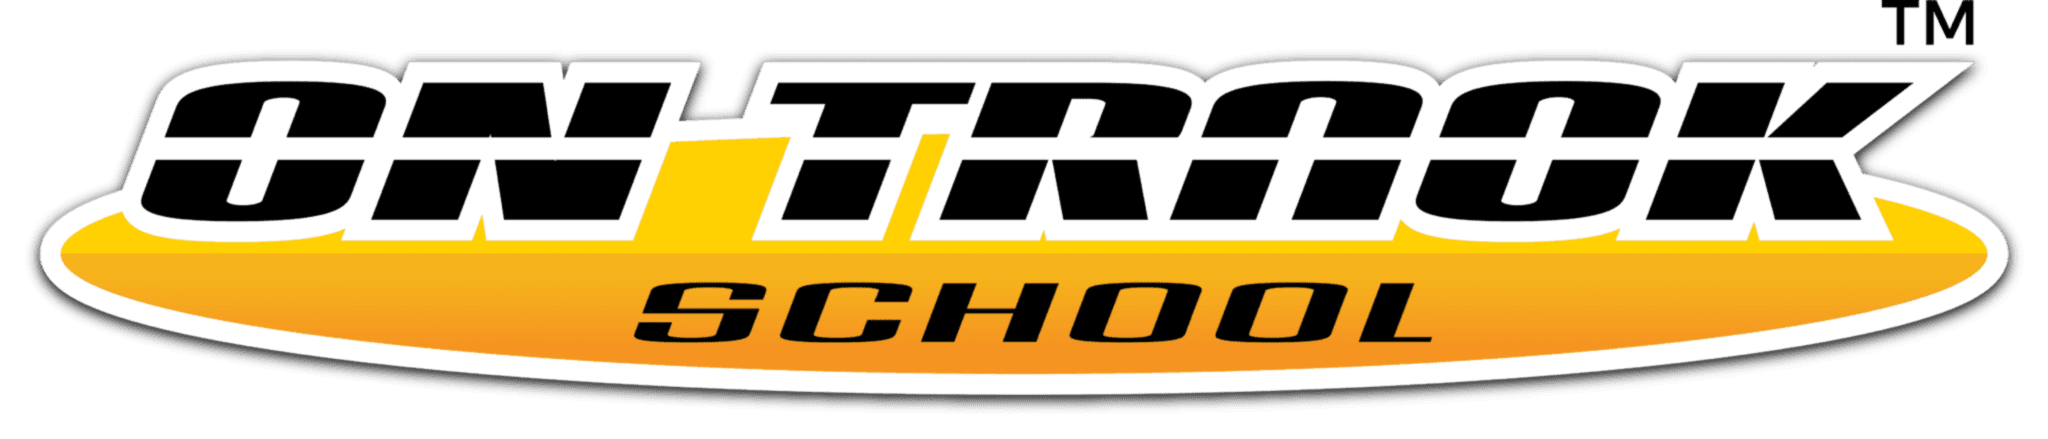 https://ontrackschool.com/wp-content/uploads/2020/06/cropped-Copy-of-On-Track-School-Logo_New.png